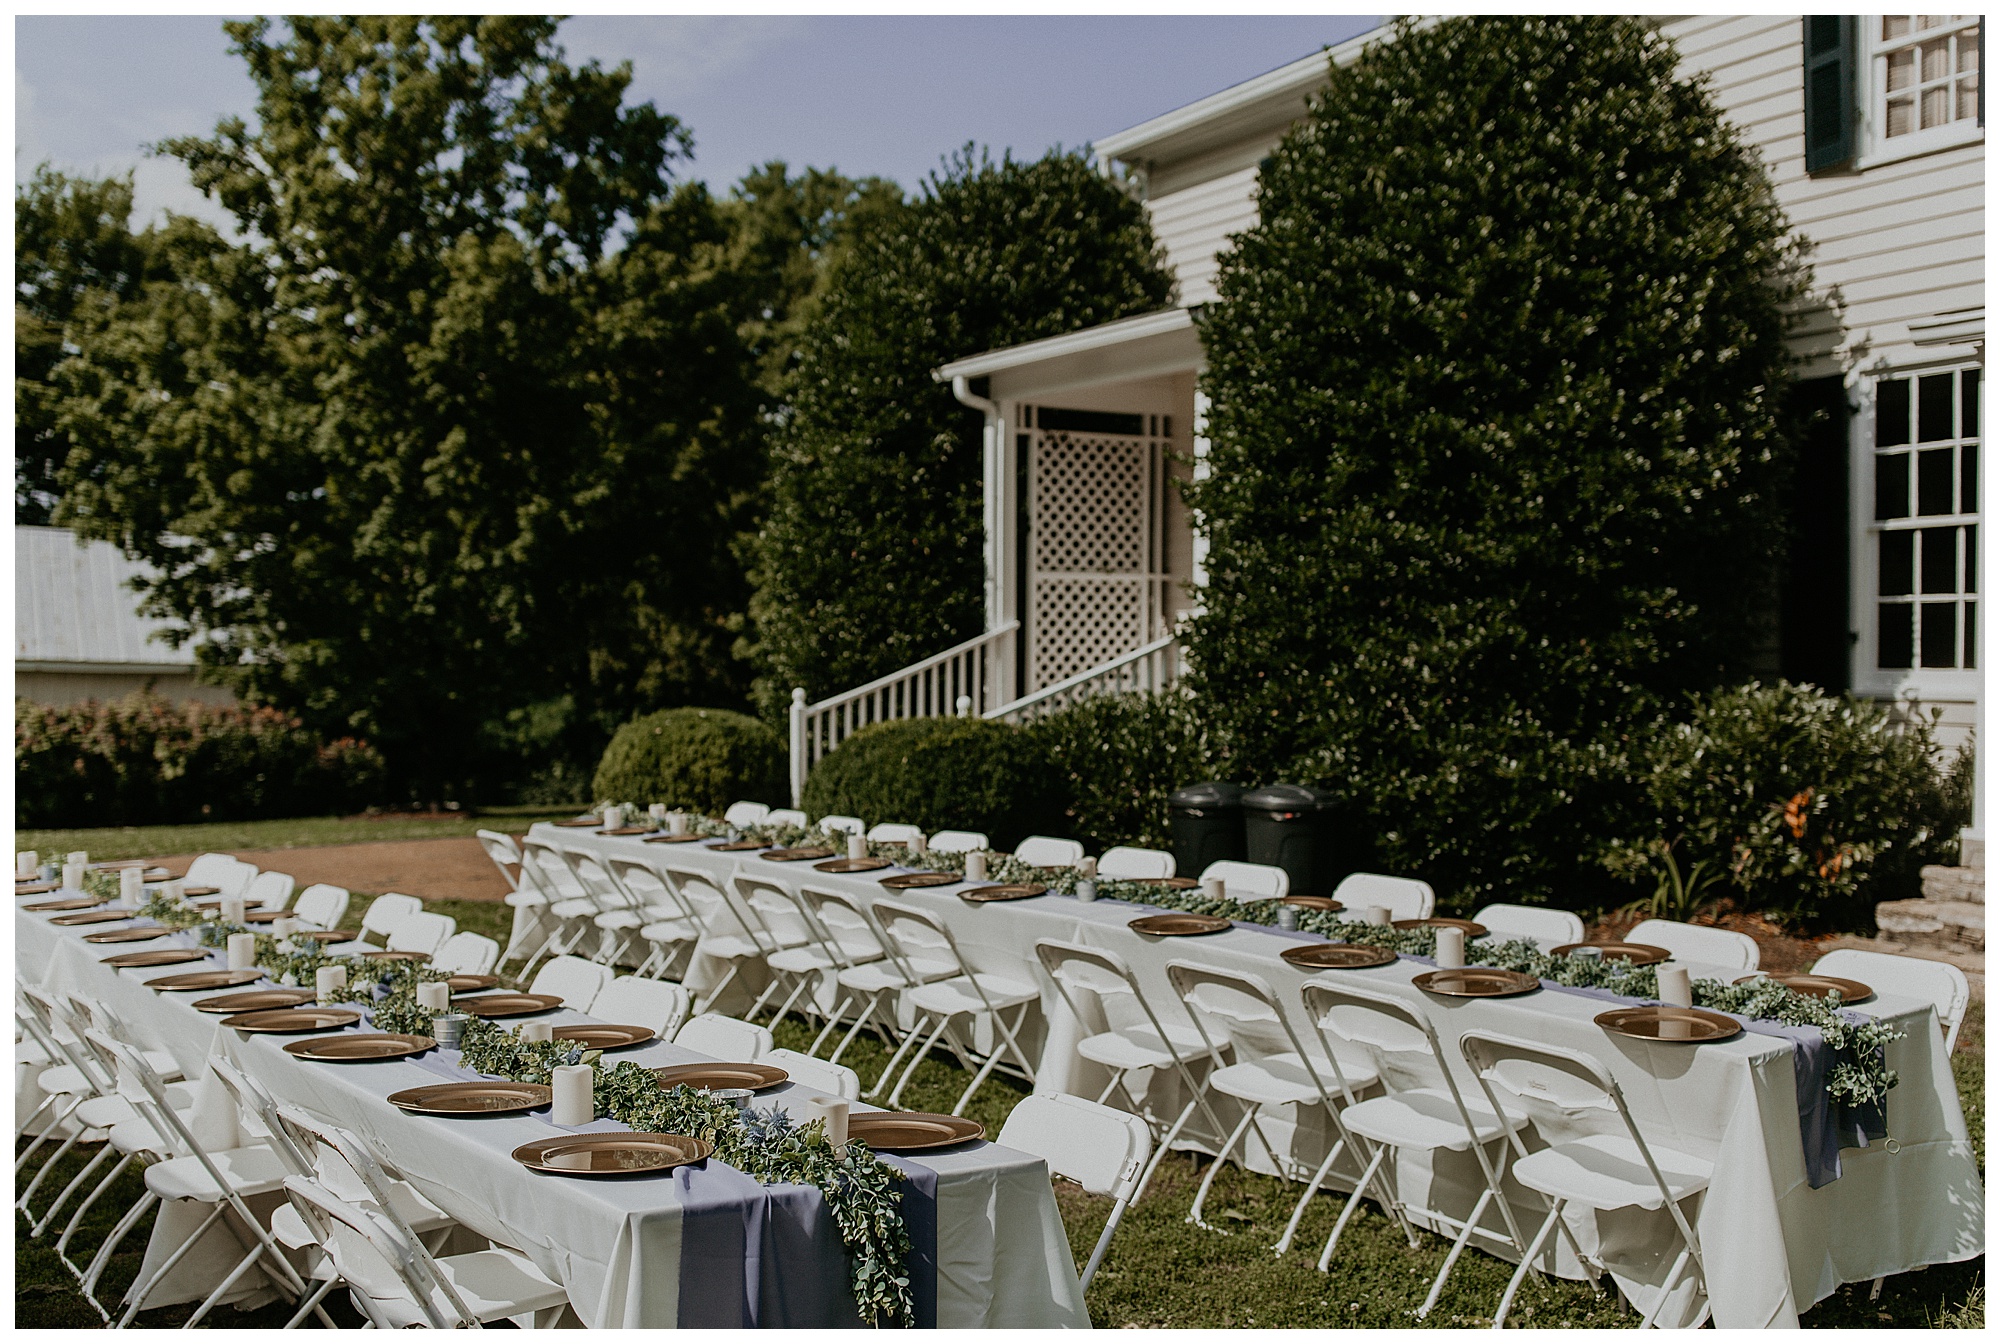 wedding banquet table and chairs at Cool Springs House, nashville wedding venue, nashville wedding decor, Nashville Wedding Photographer